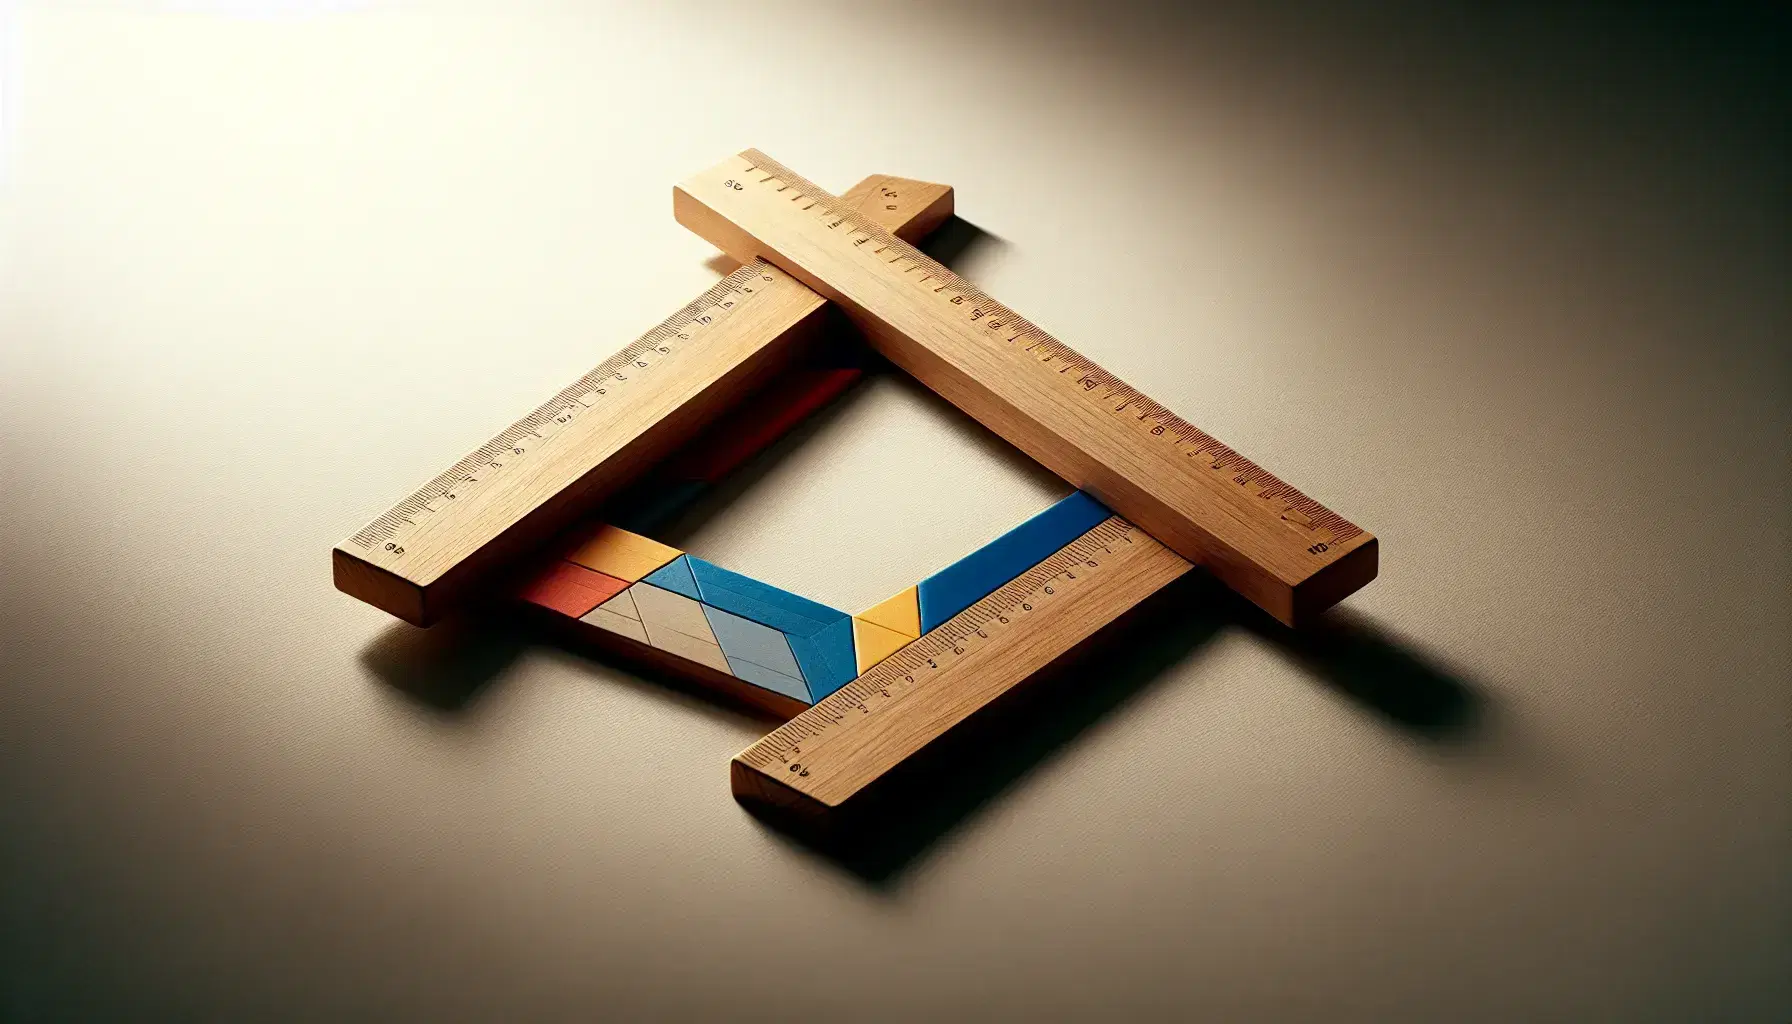 Scalene triangle formed by three wooden rulers with a blue, red, and yellow paper triangle at each corner on a light surface.